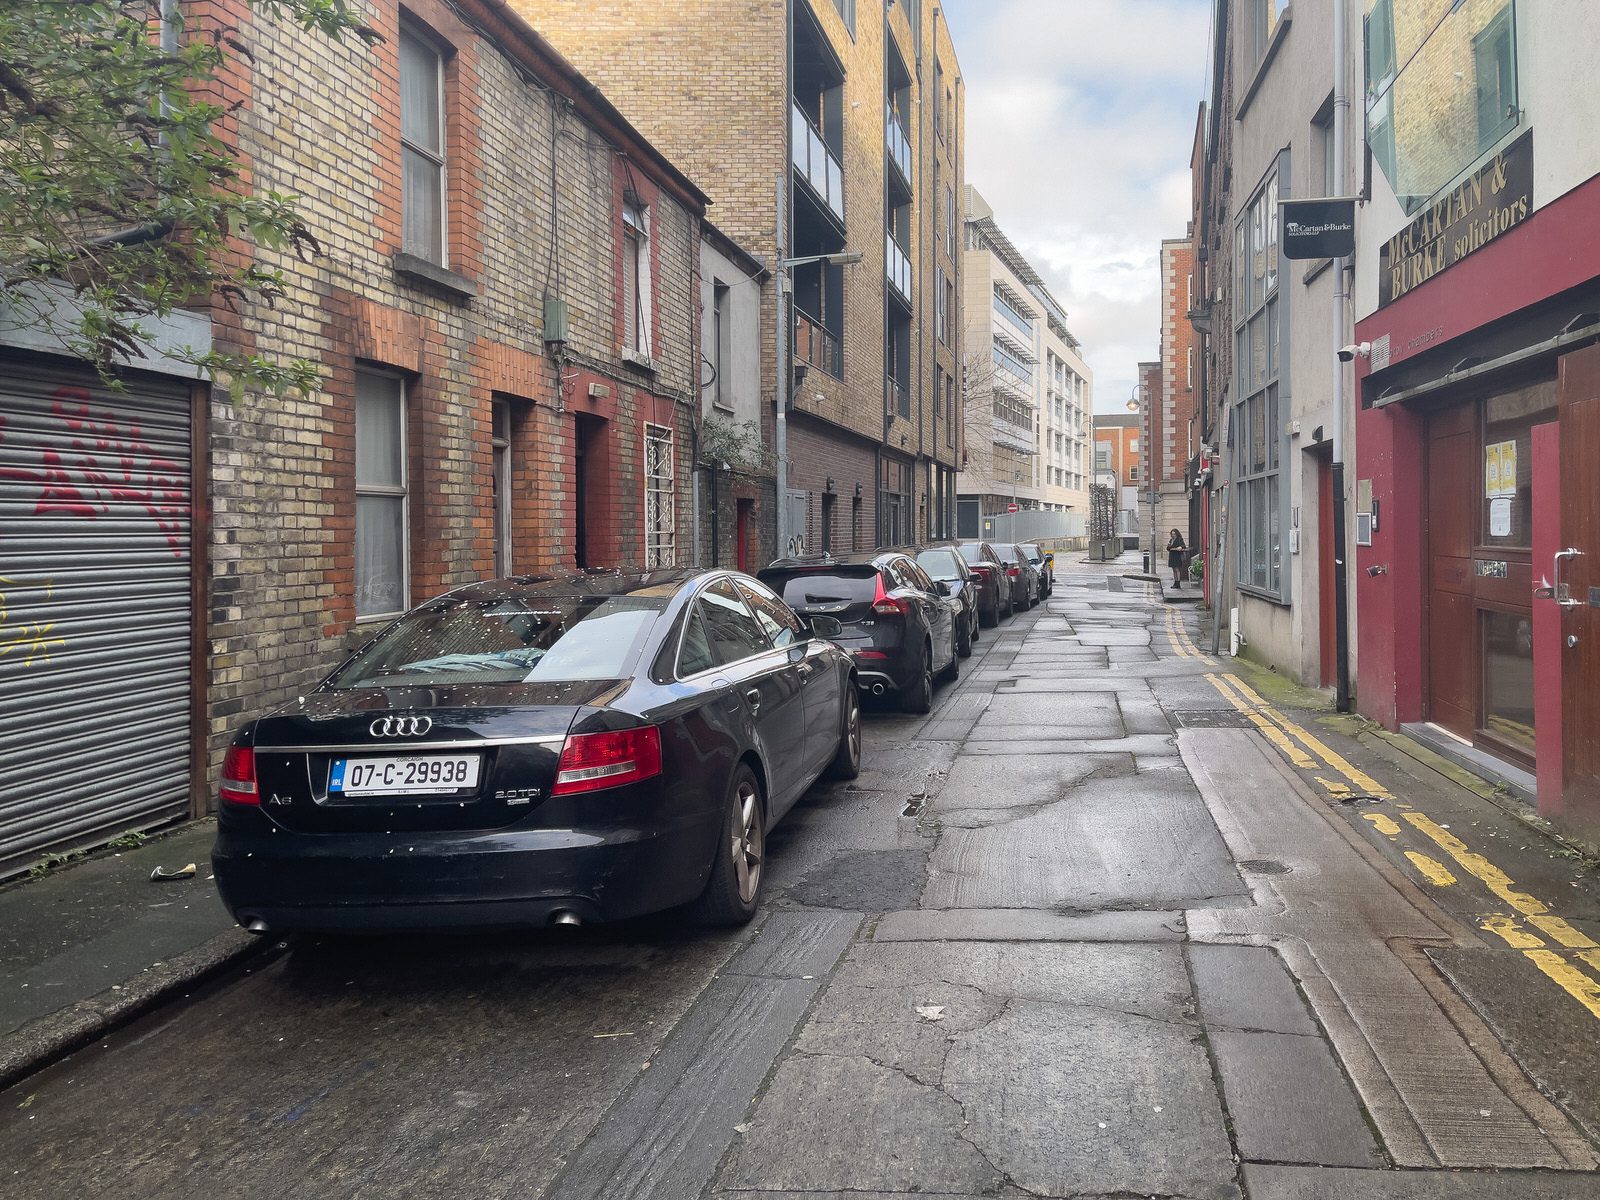 ANOTHER VISIT TO COKE LANE [SMITHFIELD AREA OF DUBLIN]-228143-1